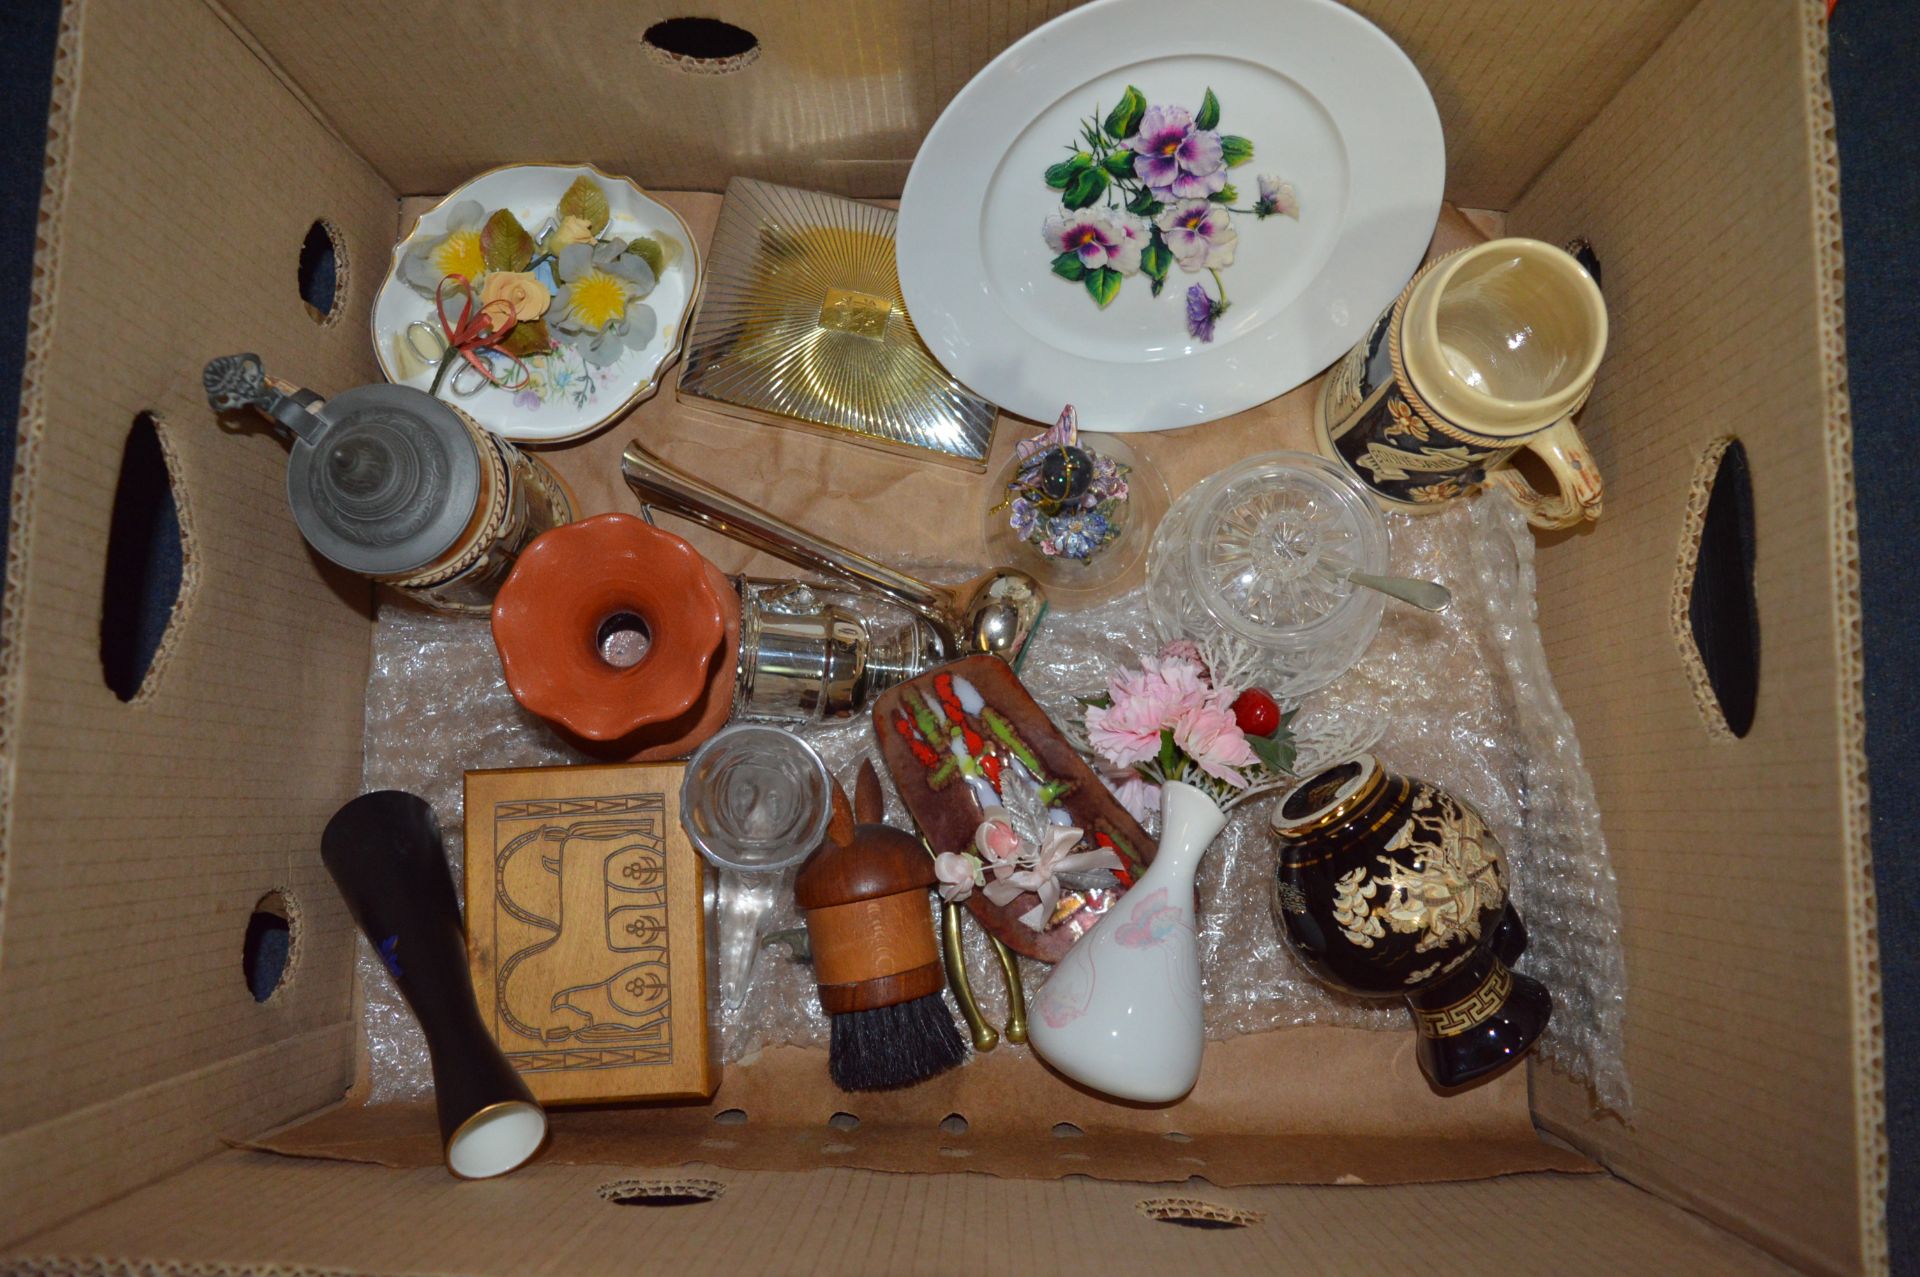 Box Containing Ornaments, Vases, Stein Mugs, Silver Plated Ware, etc.